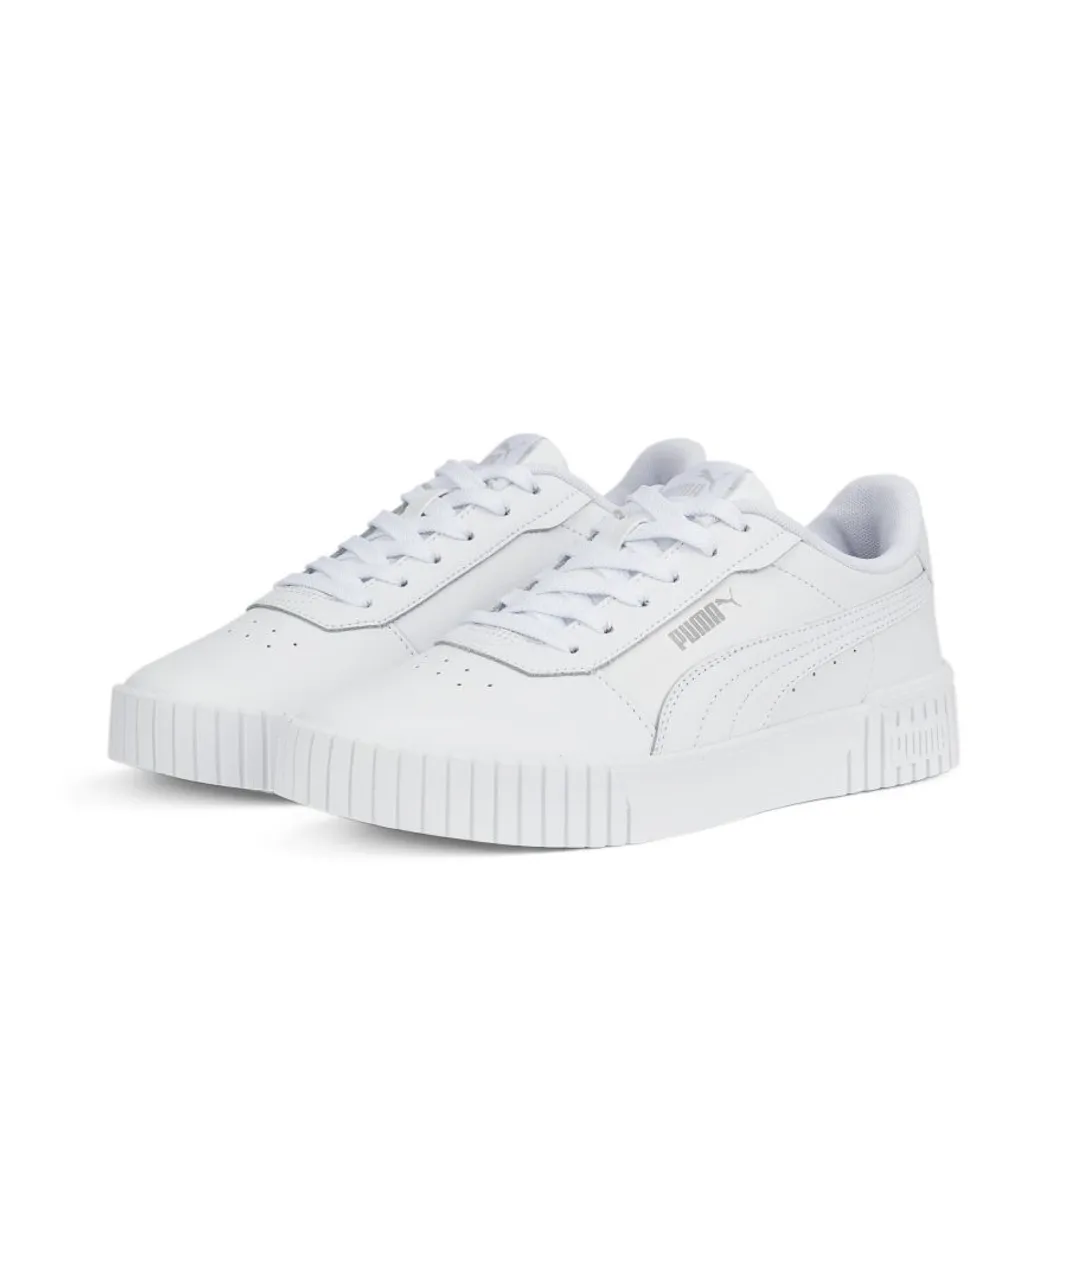 Puma Womens Carina 2.0 sneakers women - White Leather (archived)